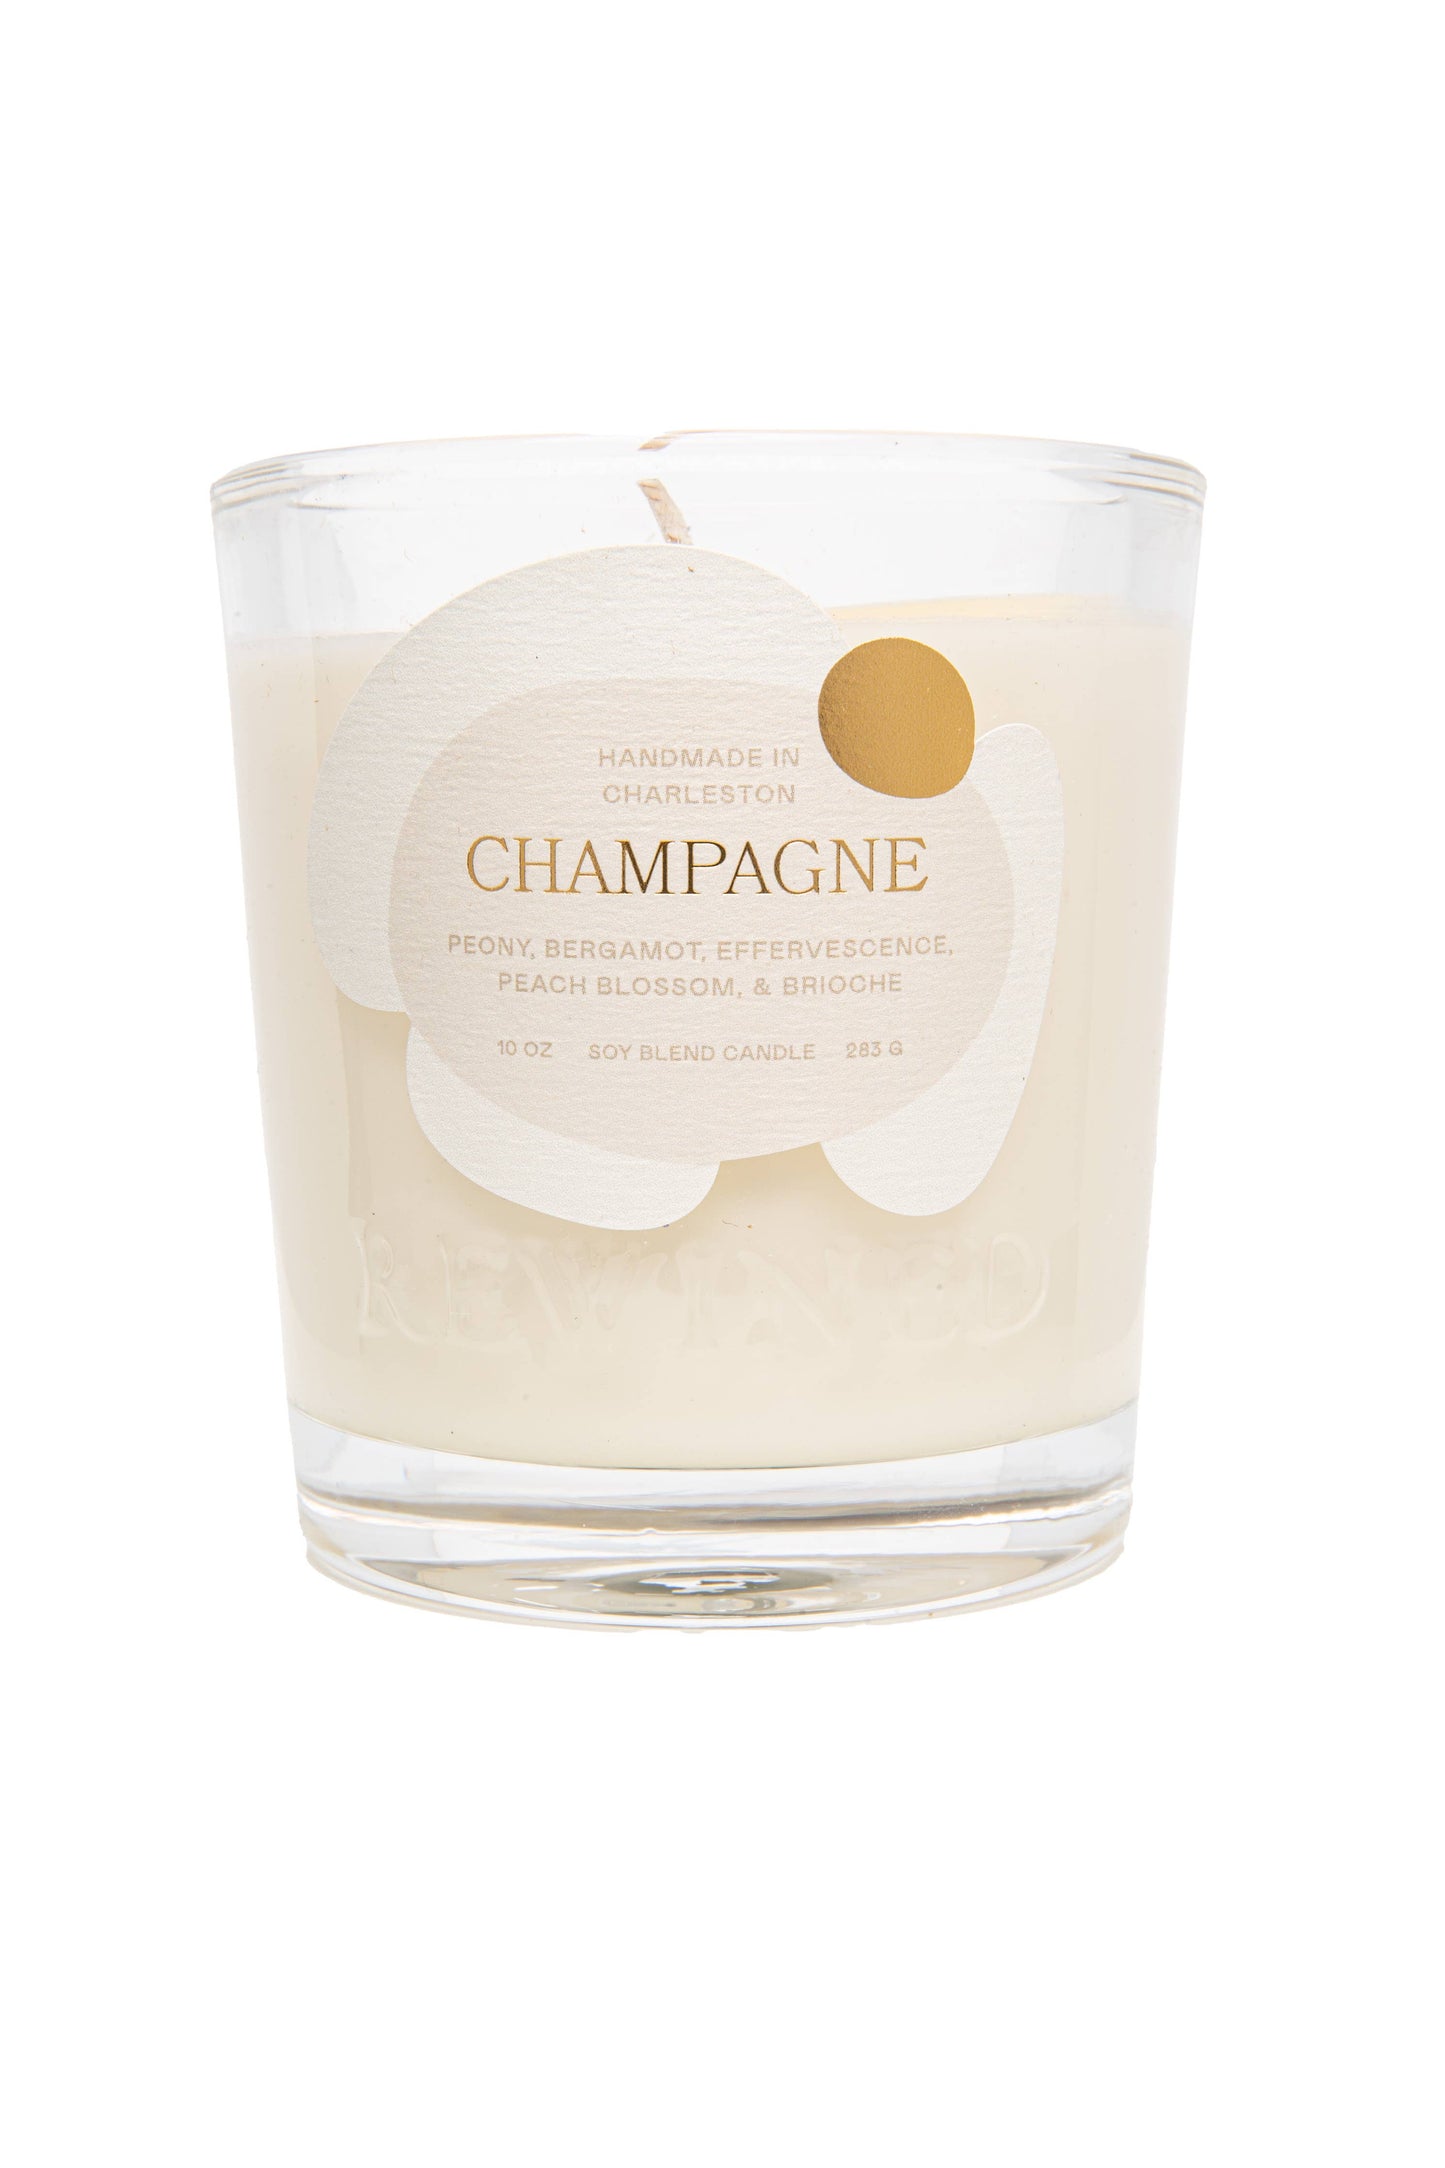 Rewined Champagne Candle 10 oz: 100% soy wax